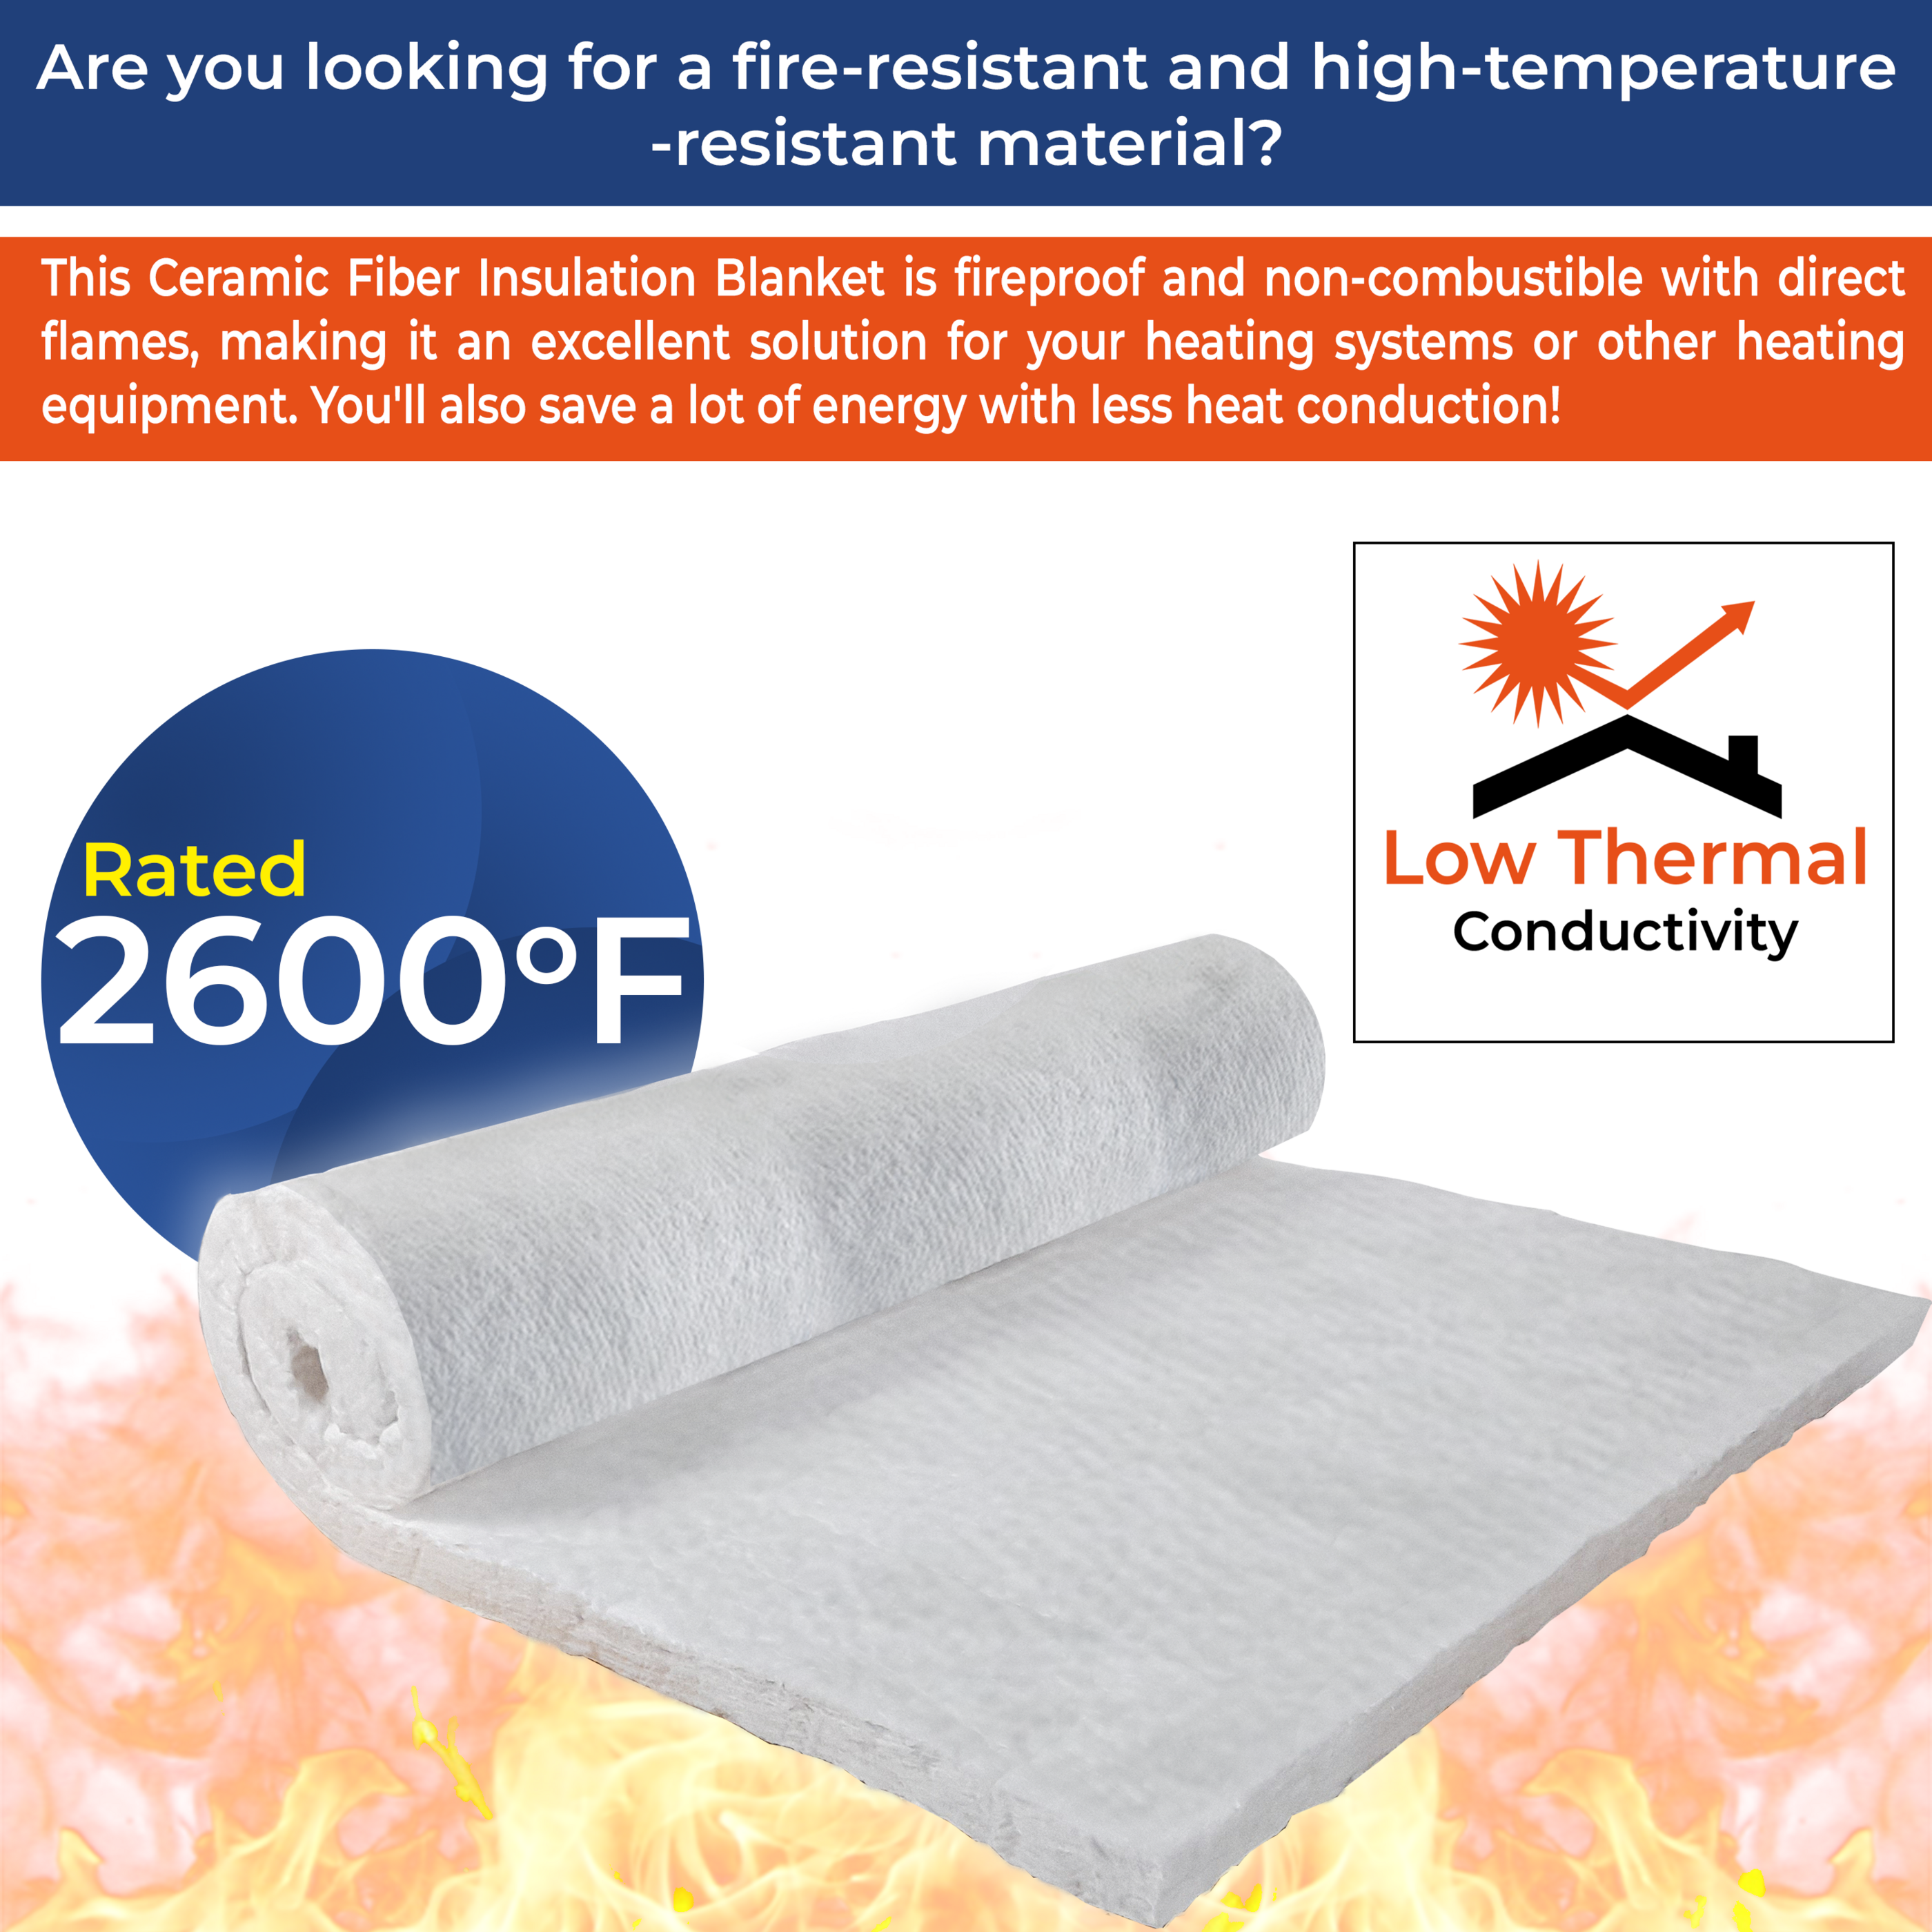 Simond Store Ceramic Fiber Blanket, 8lb 2600f, 1 x 12 x 24, High Temperature Insulation for Forge Furnace Wood Stove Fireplace Kiln Pizza Oven